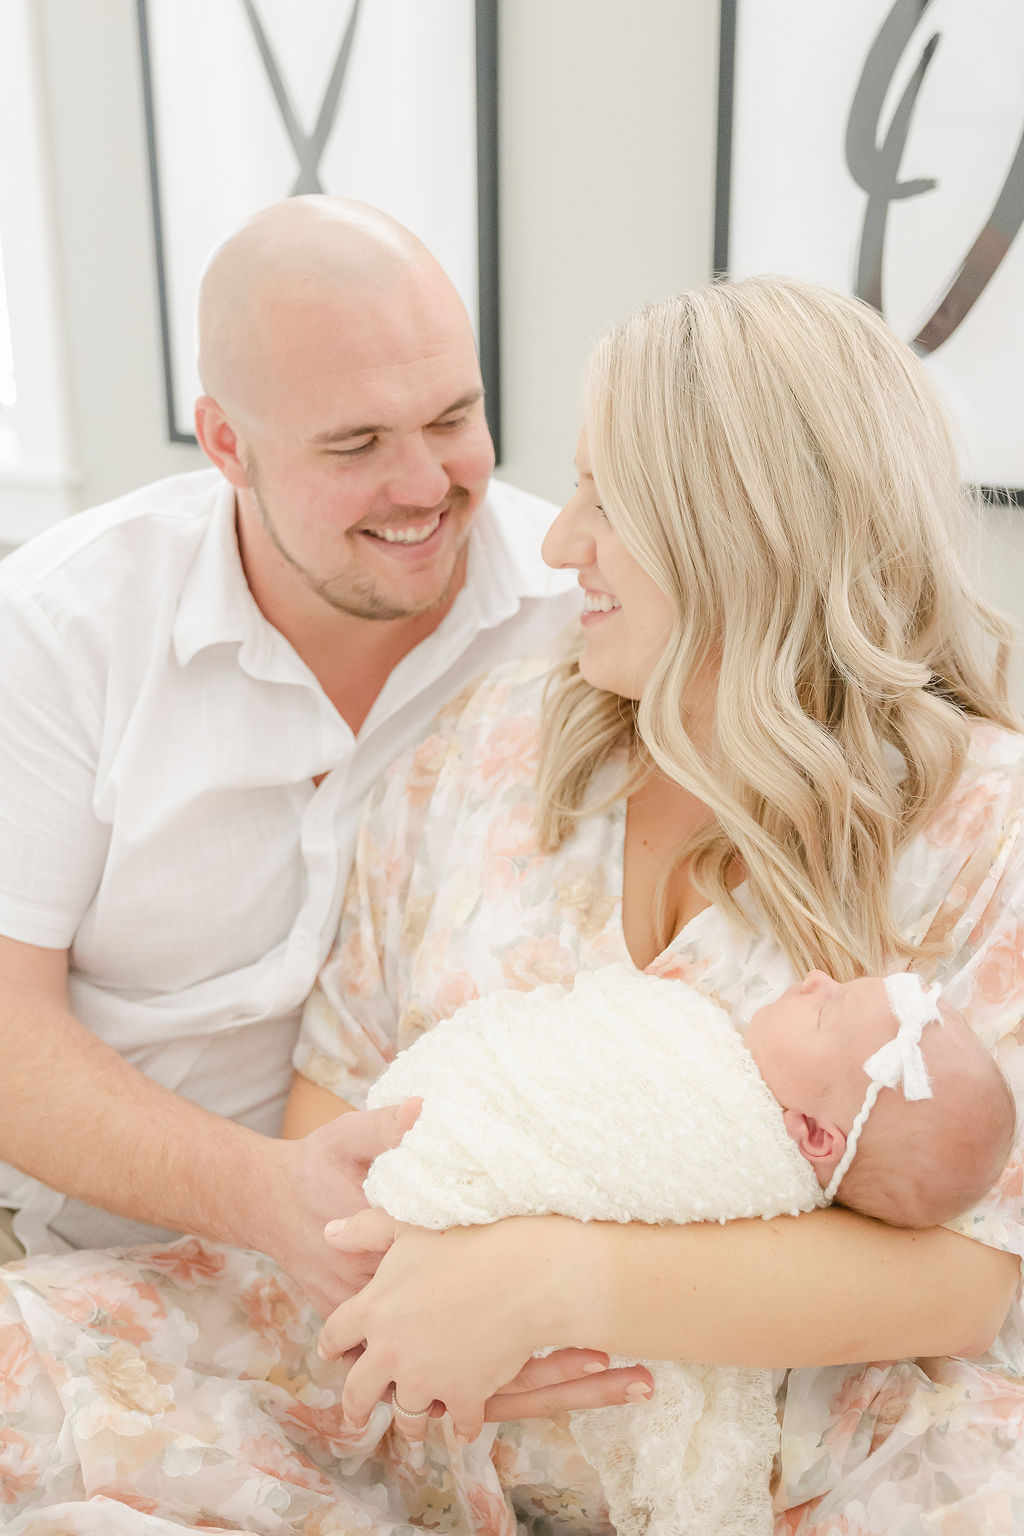 New parents smile at each other while sitting on a bed with their newborn baby sleeping in mom's arms after some indianapolis parenting classes